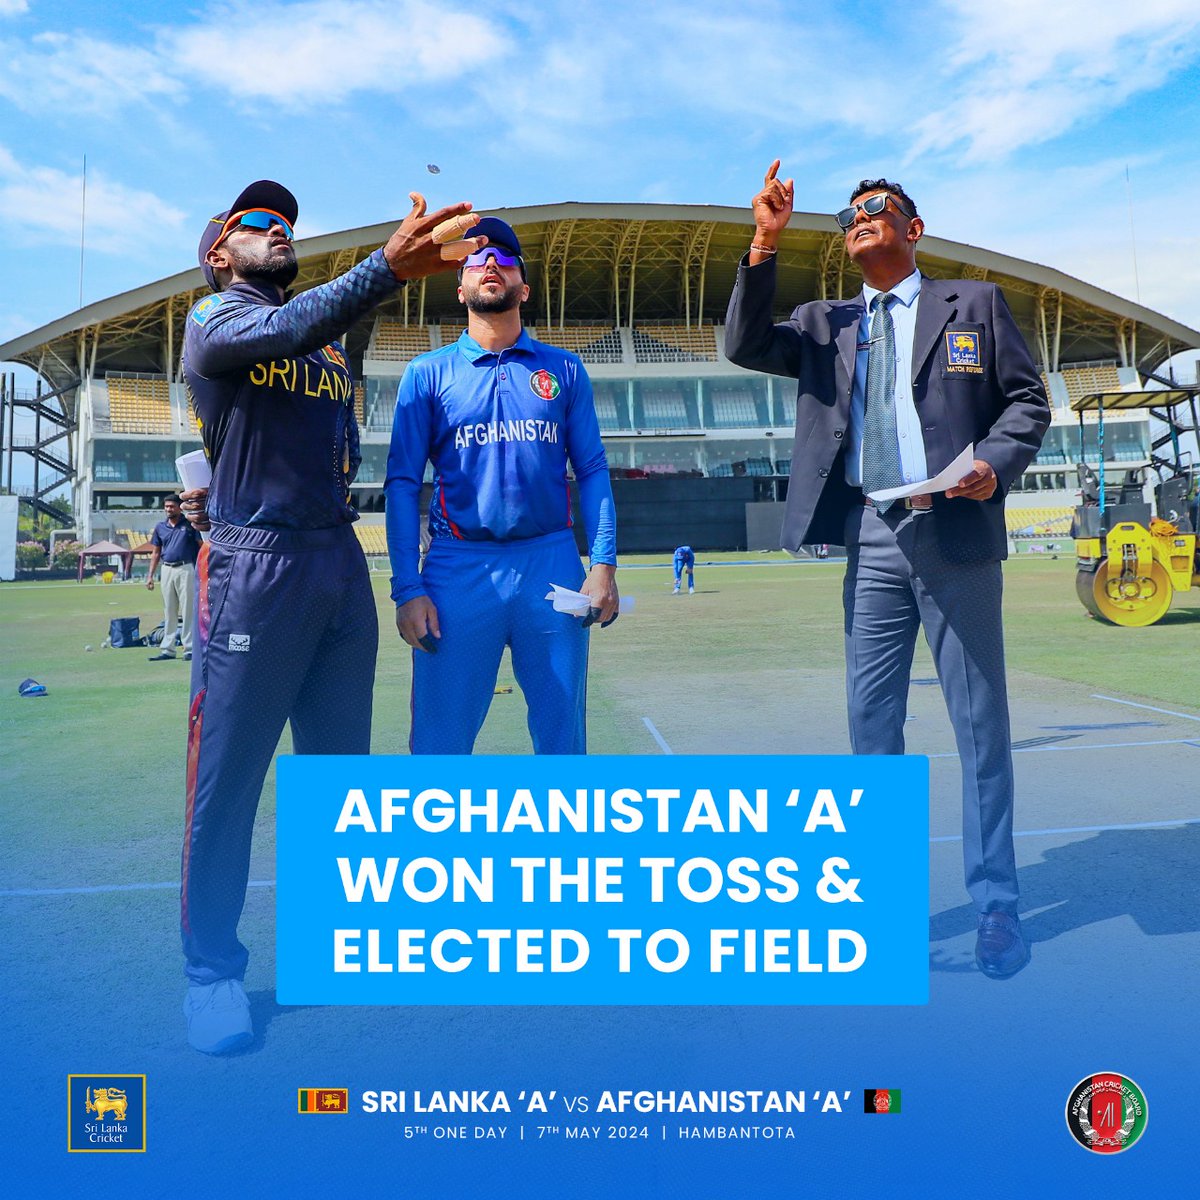 Afghanistan 'A' won the toss yet again and elected to field first at MRICS Hamabantota. #SLvAFG #SLATeam